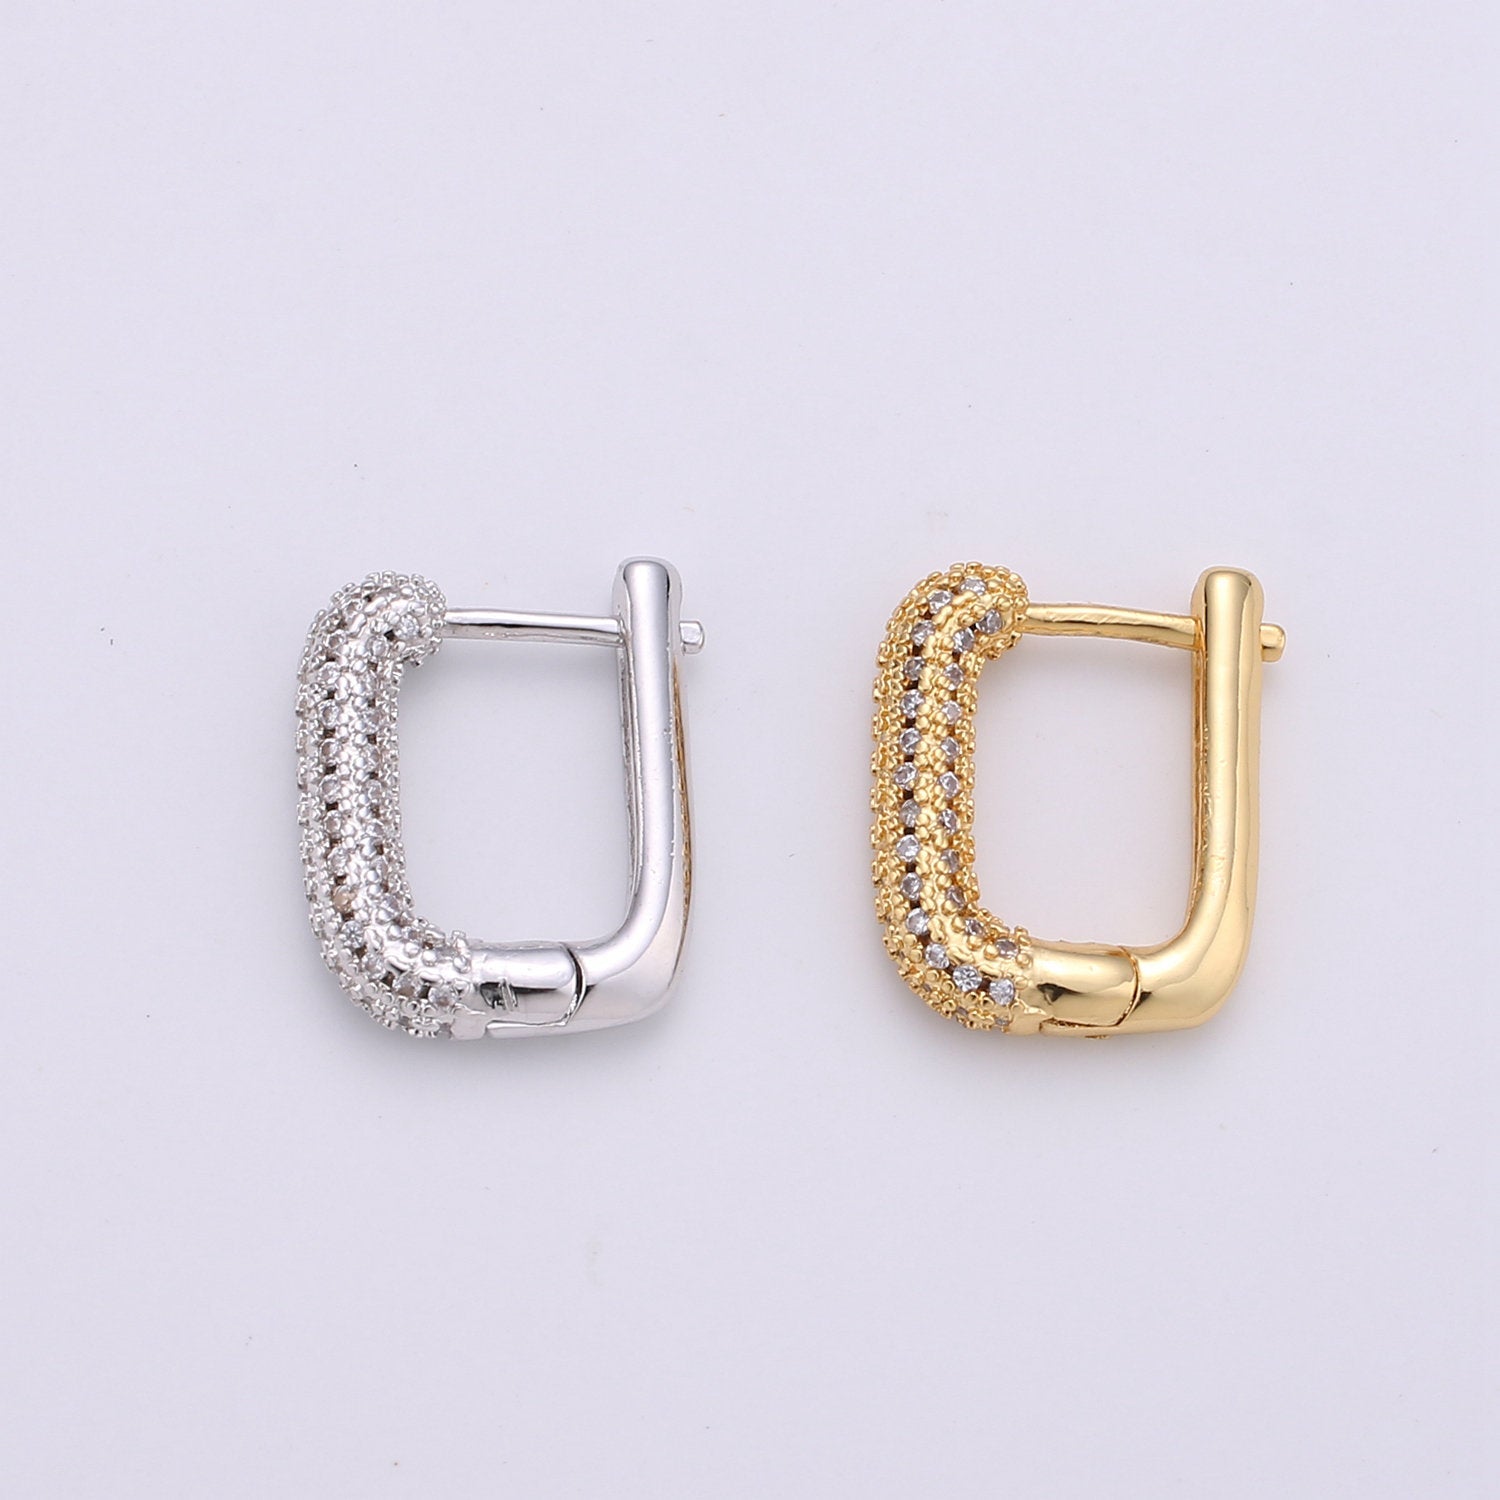 1 pair Dainty Mini Ear Huggie Hoop Earrings, GOLD SILVER micro pave cz cartilage hoops for everyday wear earring for girl Geometric Jewelry - DLUXCA